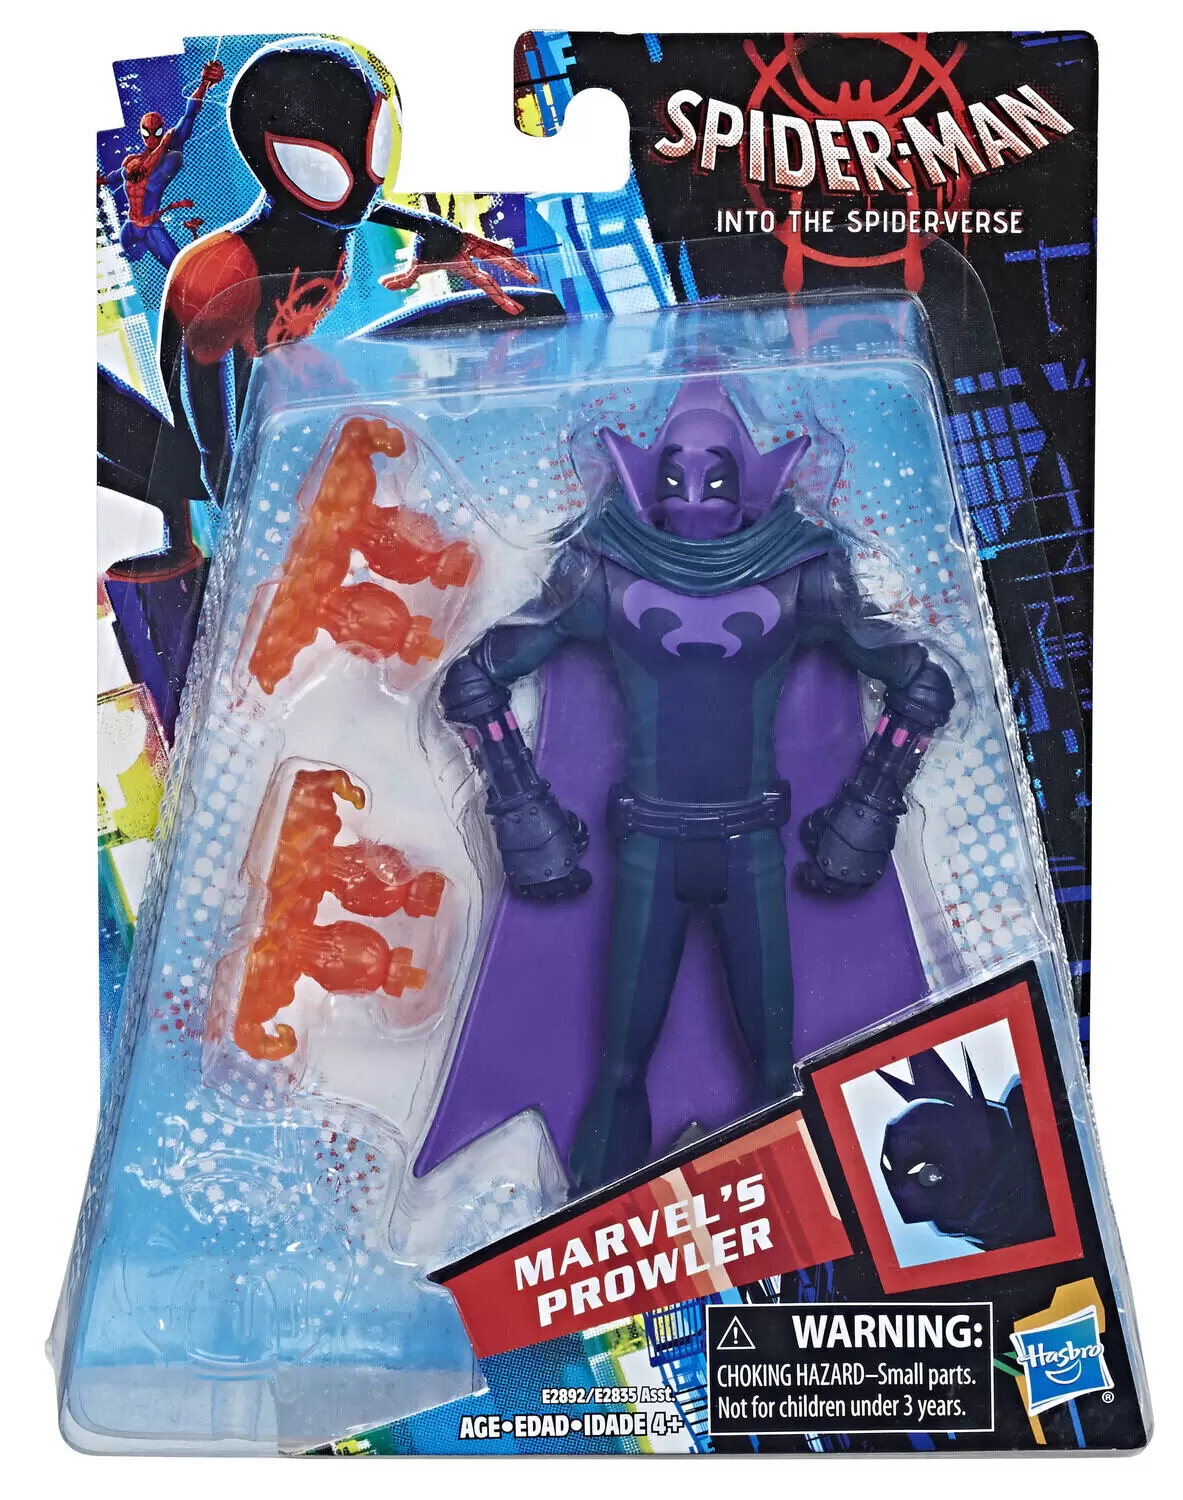 Spider-Man Into The Spider-Verse - Marvel\'s Prowler